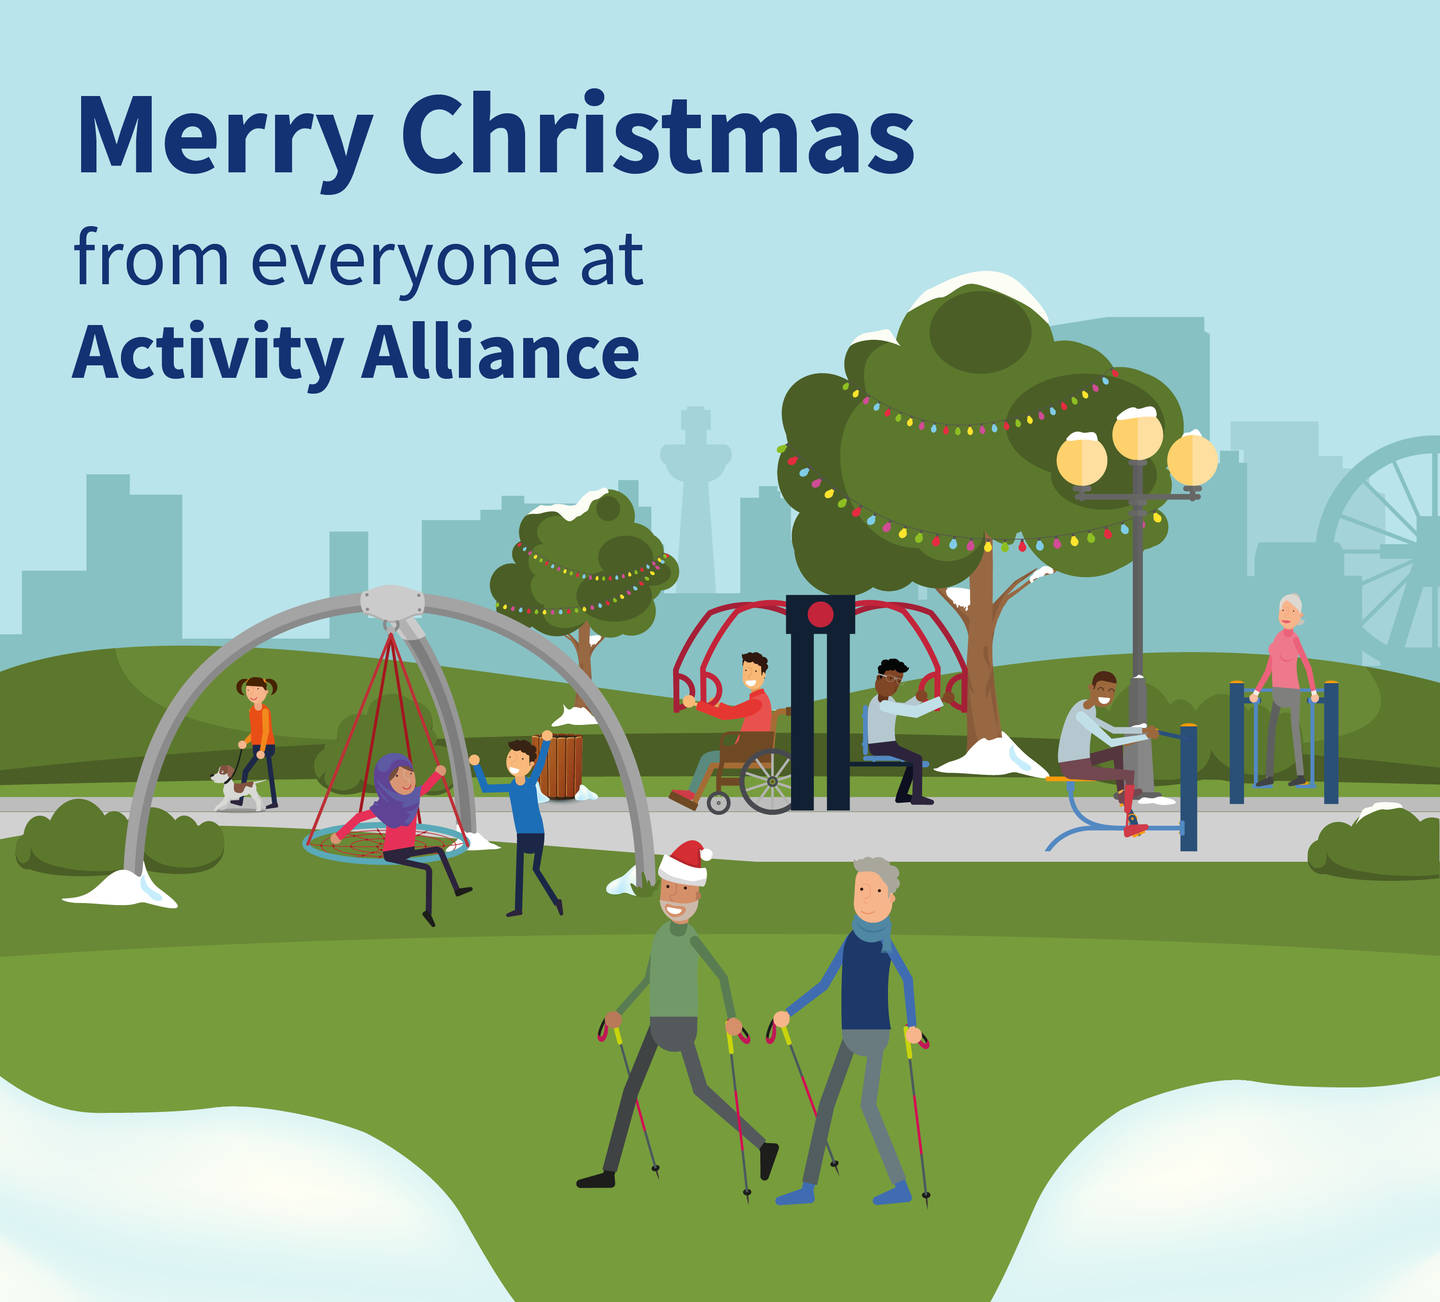 A Christmas scene of an accessible playground with people enjoying activity